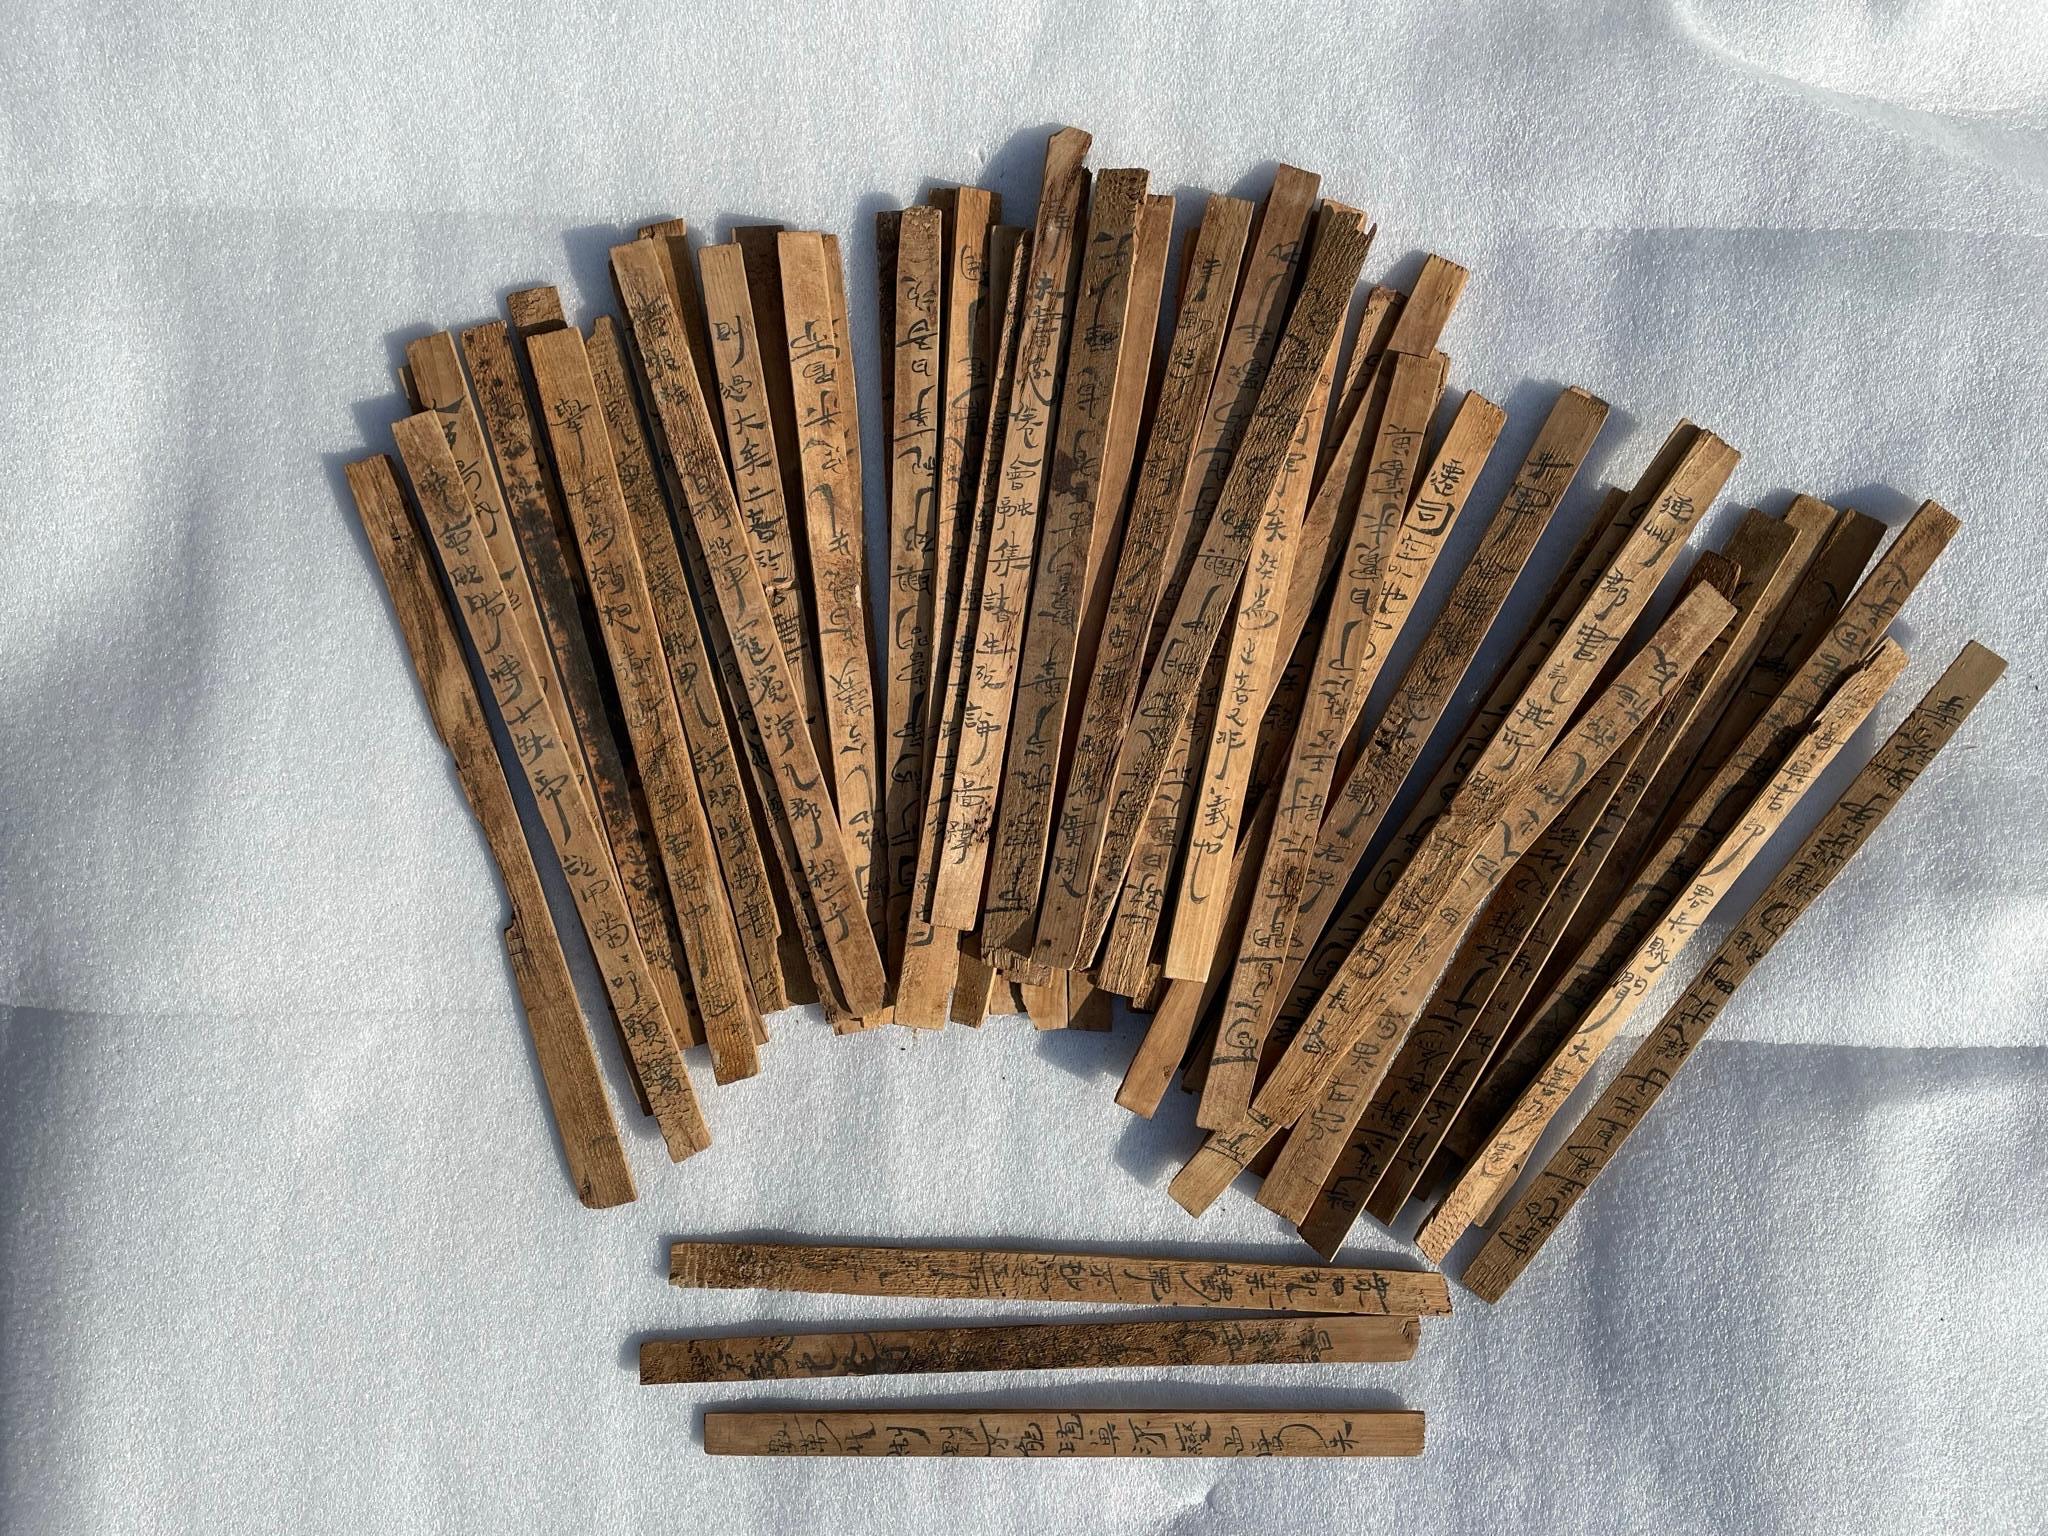 Bamboo and wooden slips - jiandú- were the main media for writing documents in China before the widespread introduction of paper during the first two centuries AD.

This substantial group, 59 pieces, of one-of-a-kind slips with painted and applied